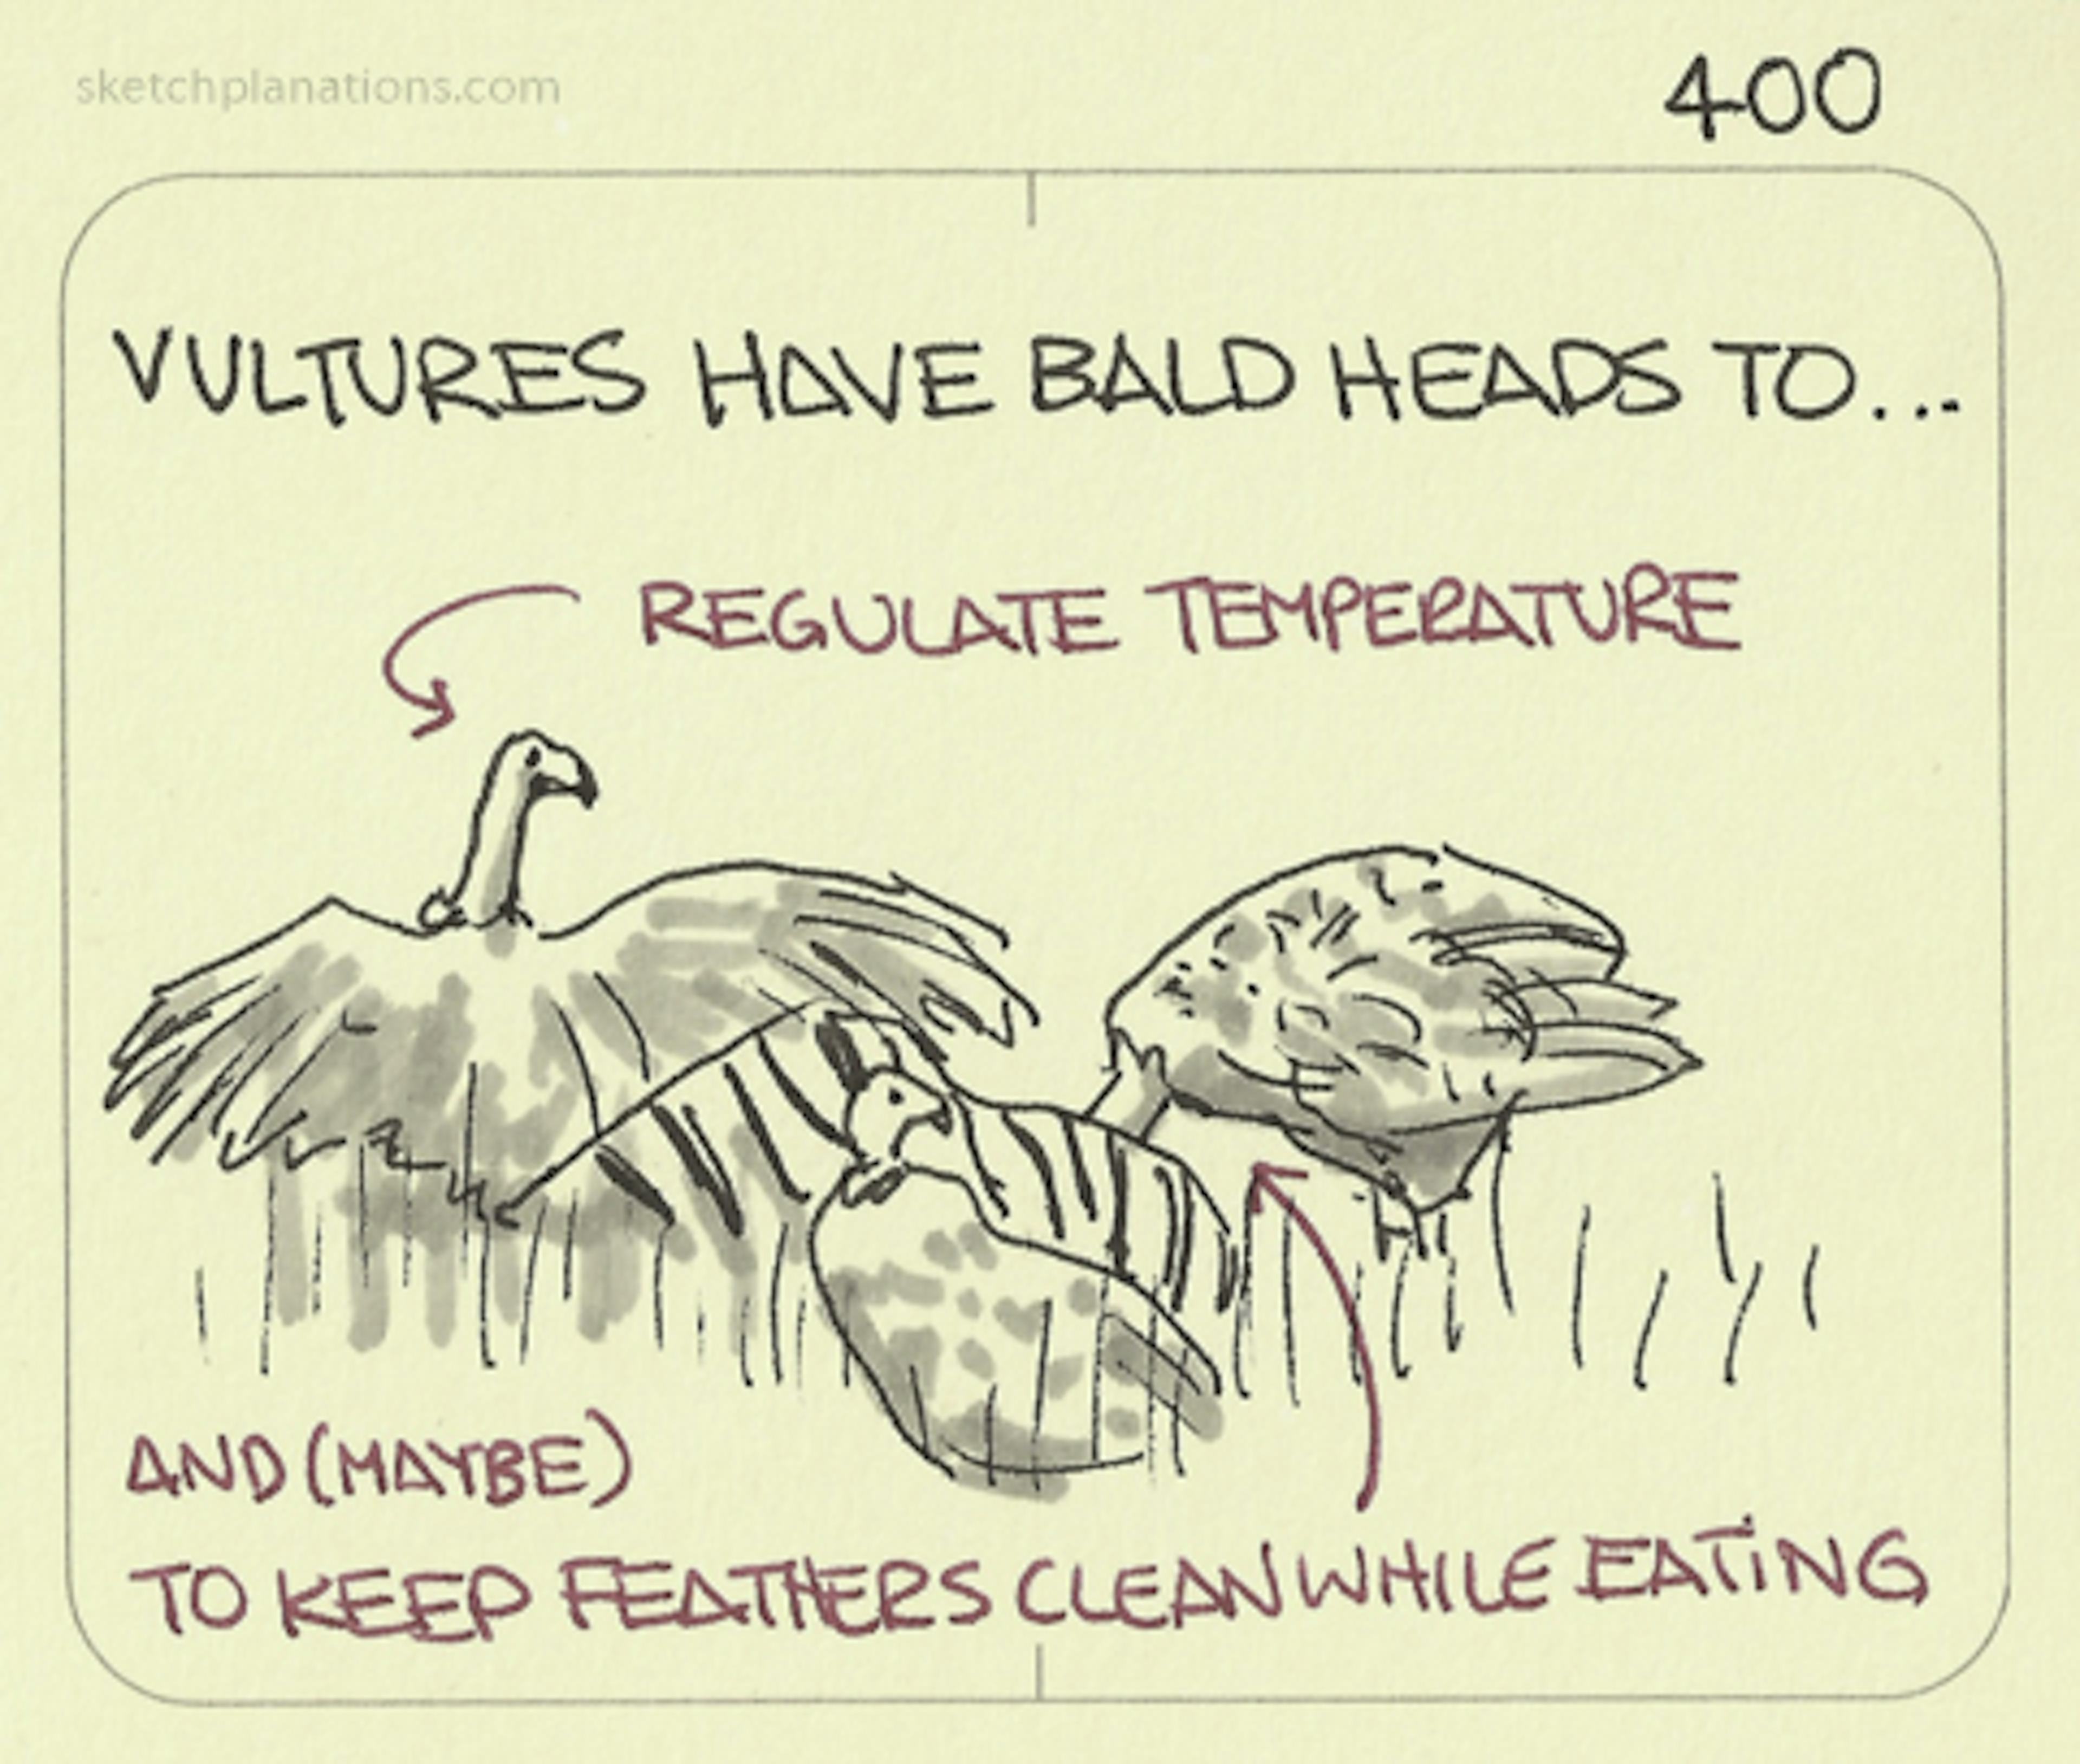 Vultures have bald heads to… - Sketchplanations